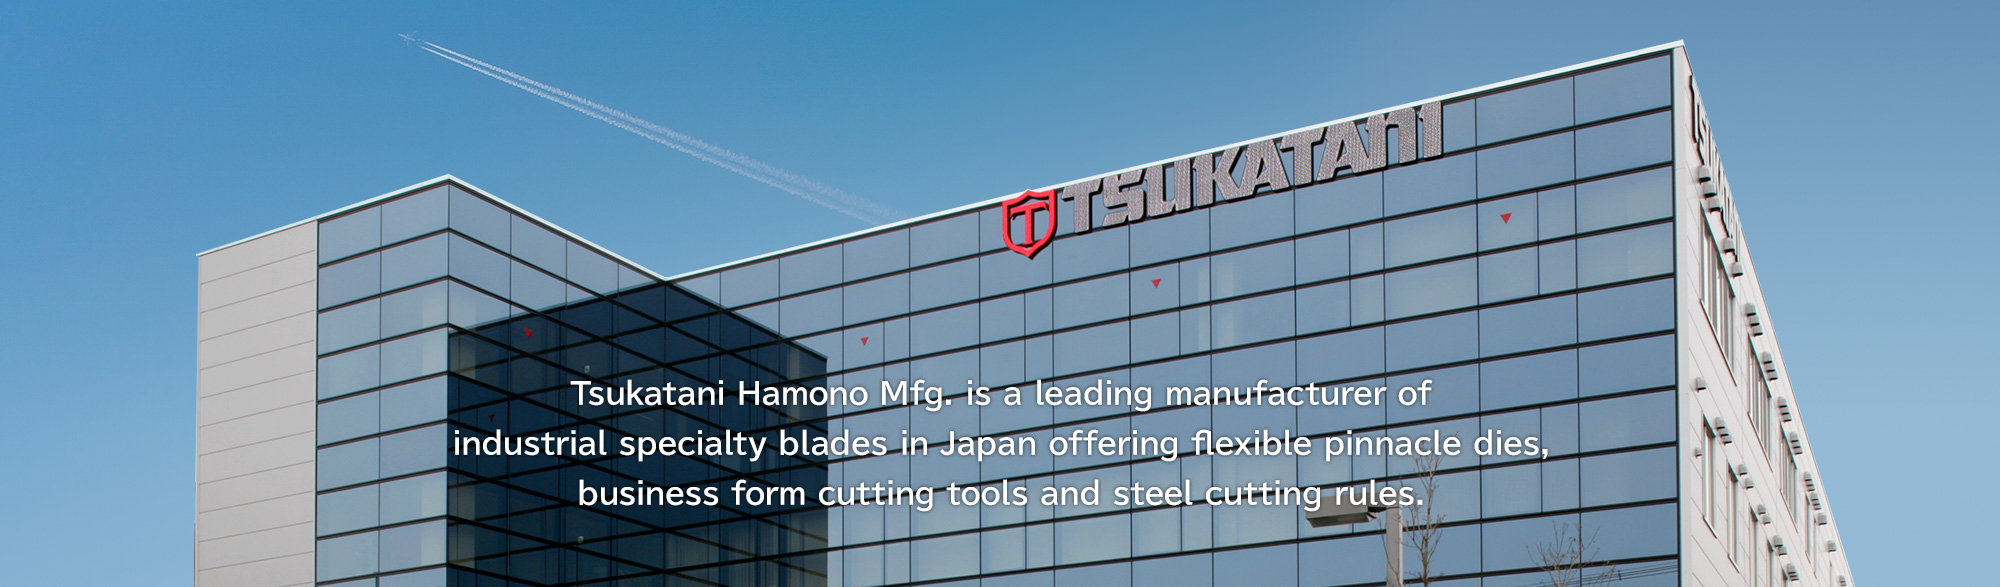 Tsukatani Hamono Mfg. is one of only a few dozen manufacturers of cutting edges (industrial specialty blades) around the world